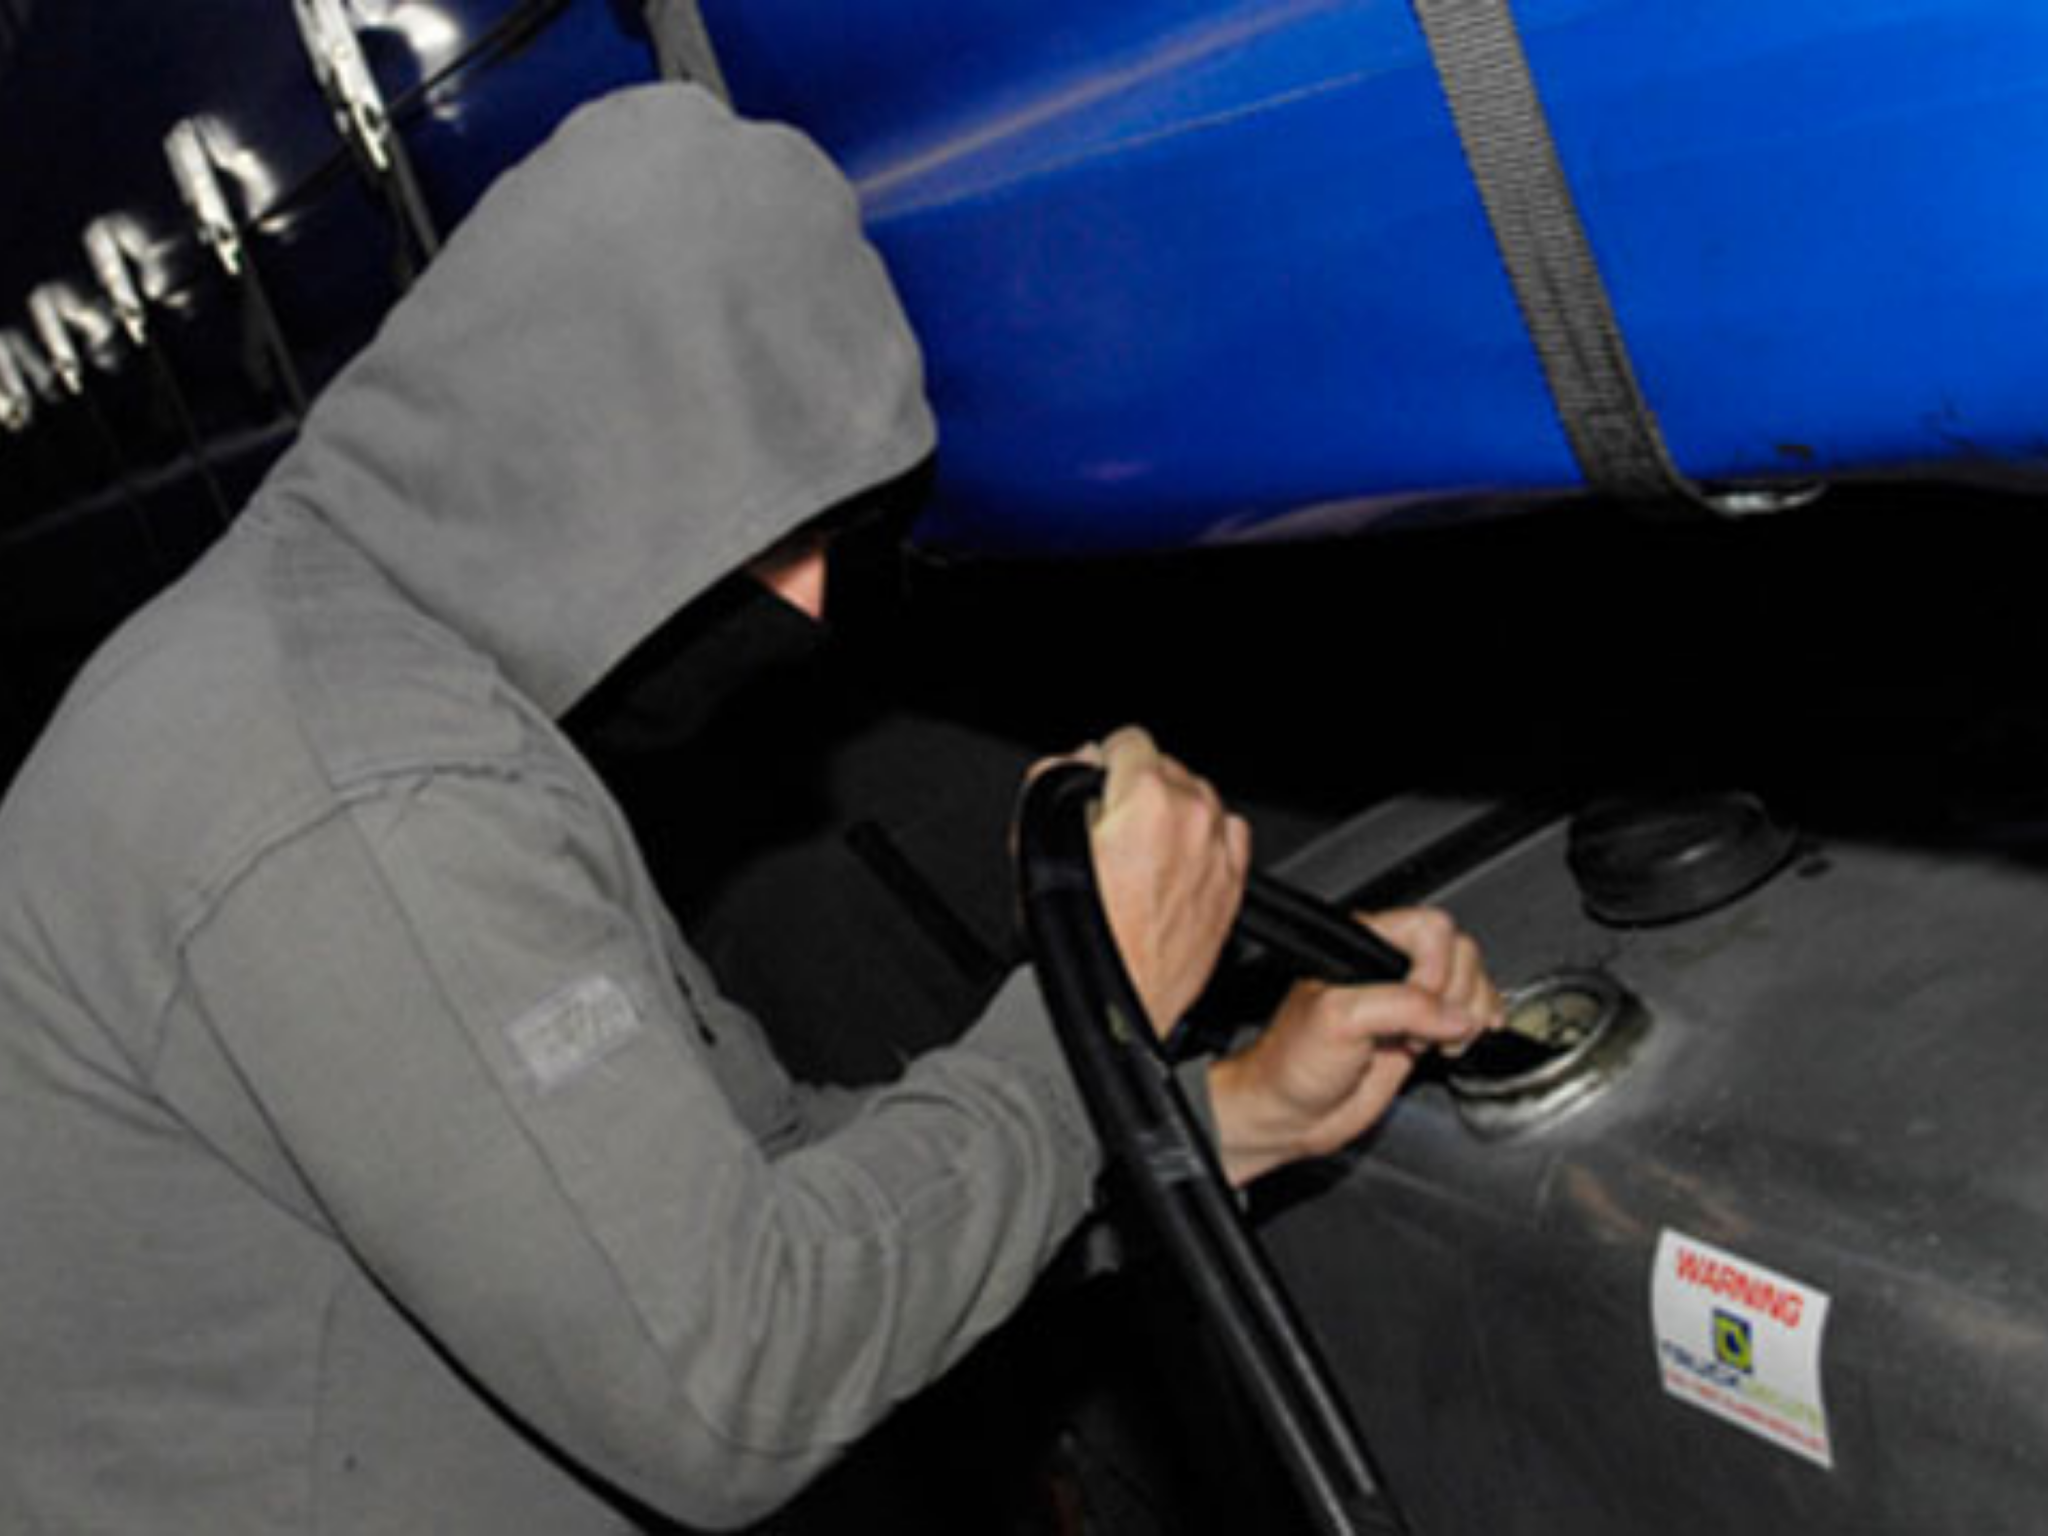 Man Stealing Fuel - 10 x Ways To Prevent Fuel Theft Image